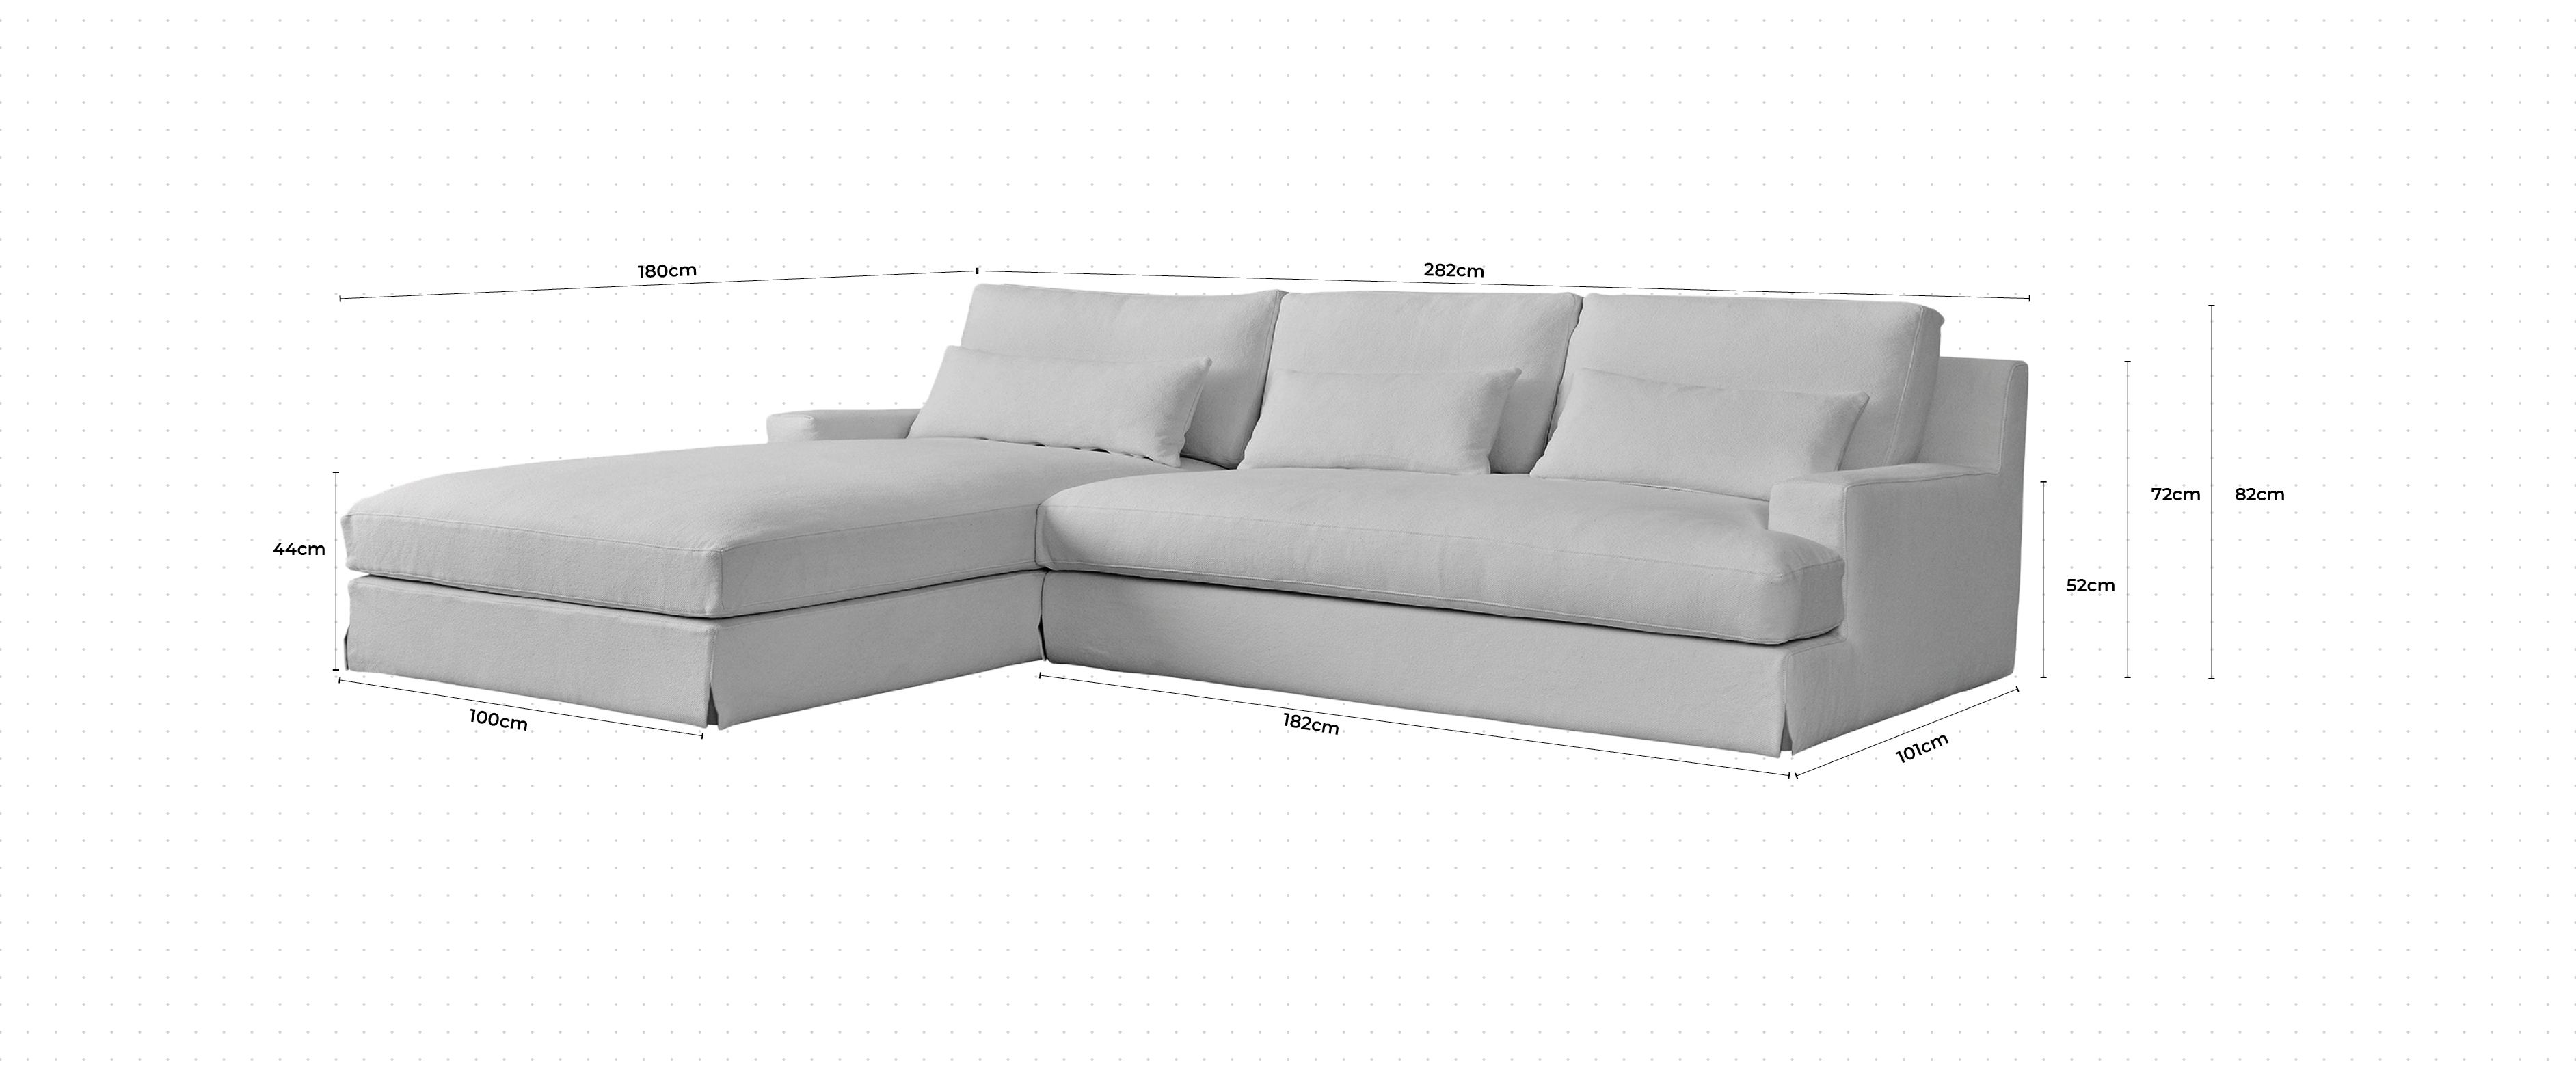 Panama With Skirt Large Chaise Sofa LHF dimensions